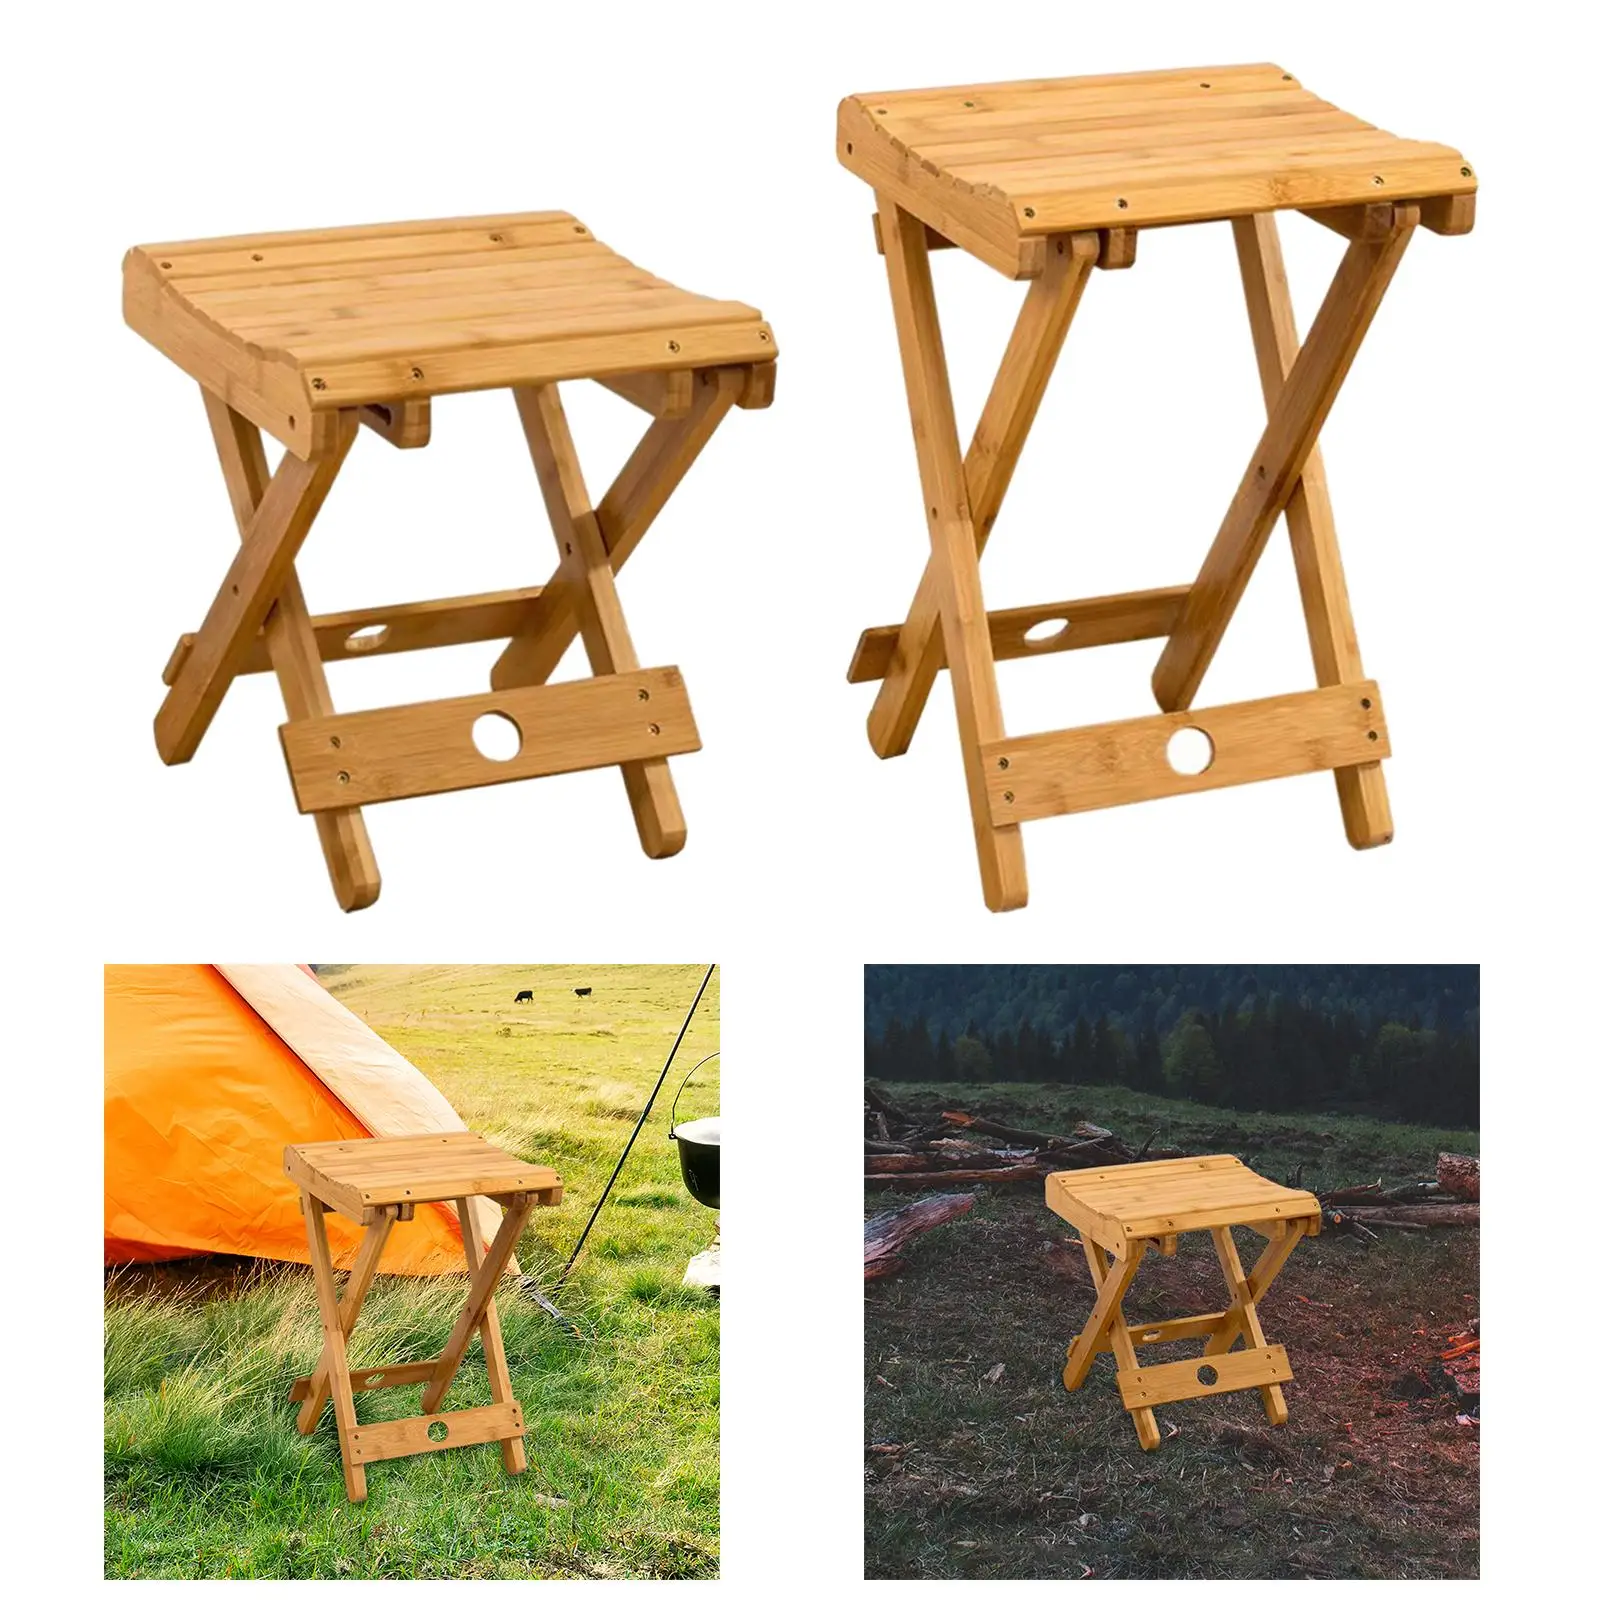 Folding Stool Camp Stool Collapsible Lightweight Ultralight Outside Fishing Chair for Beach Garden Patio Backpacking Hiking